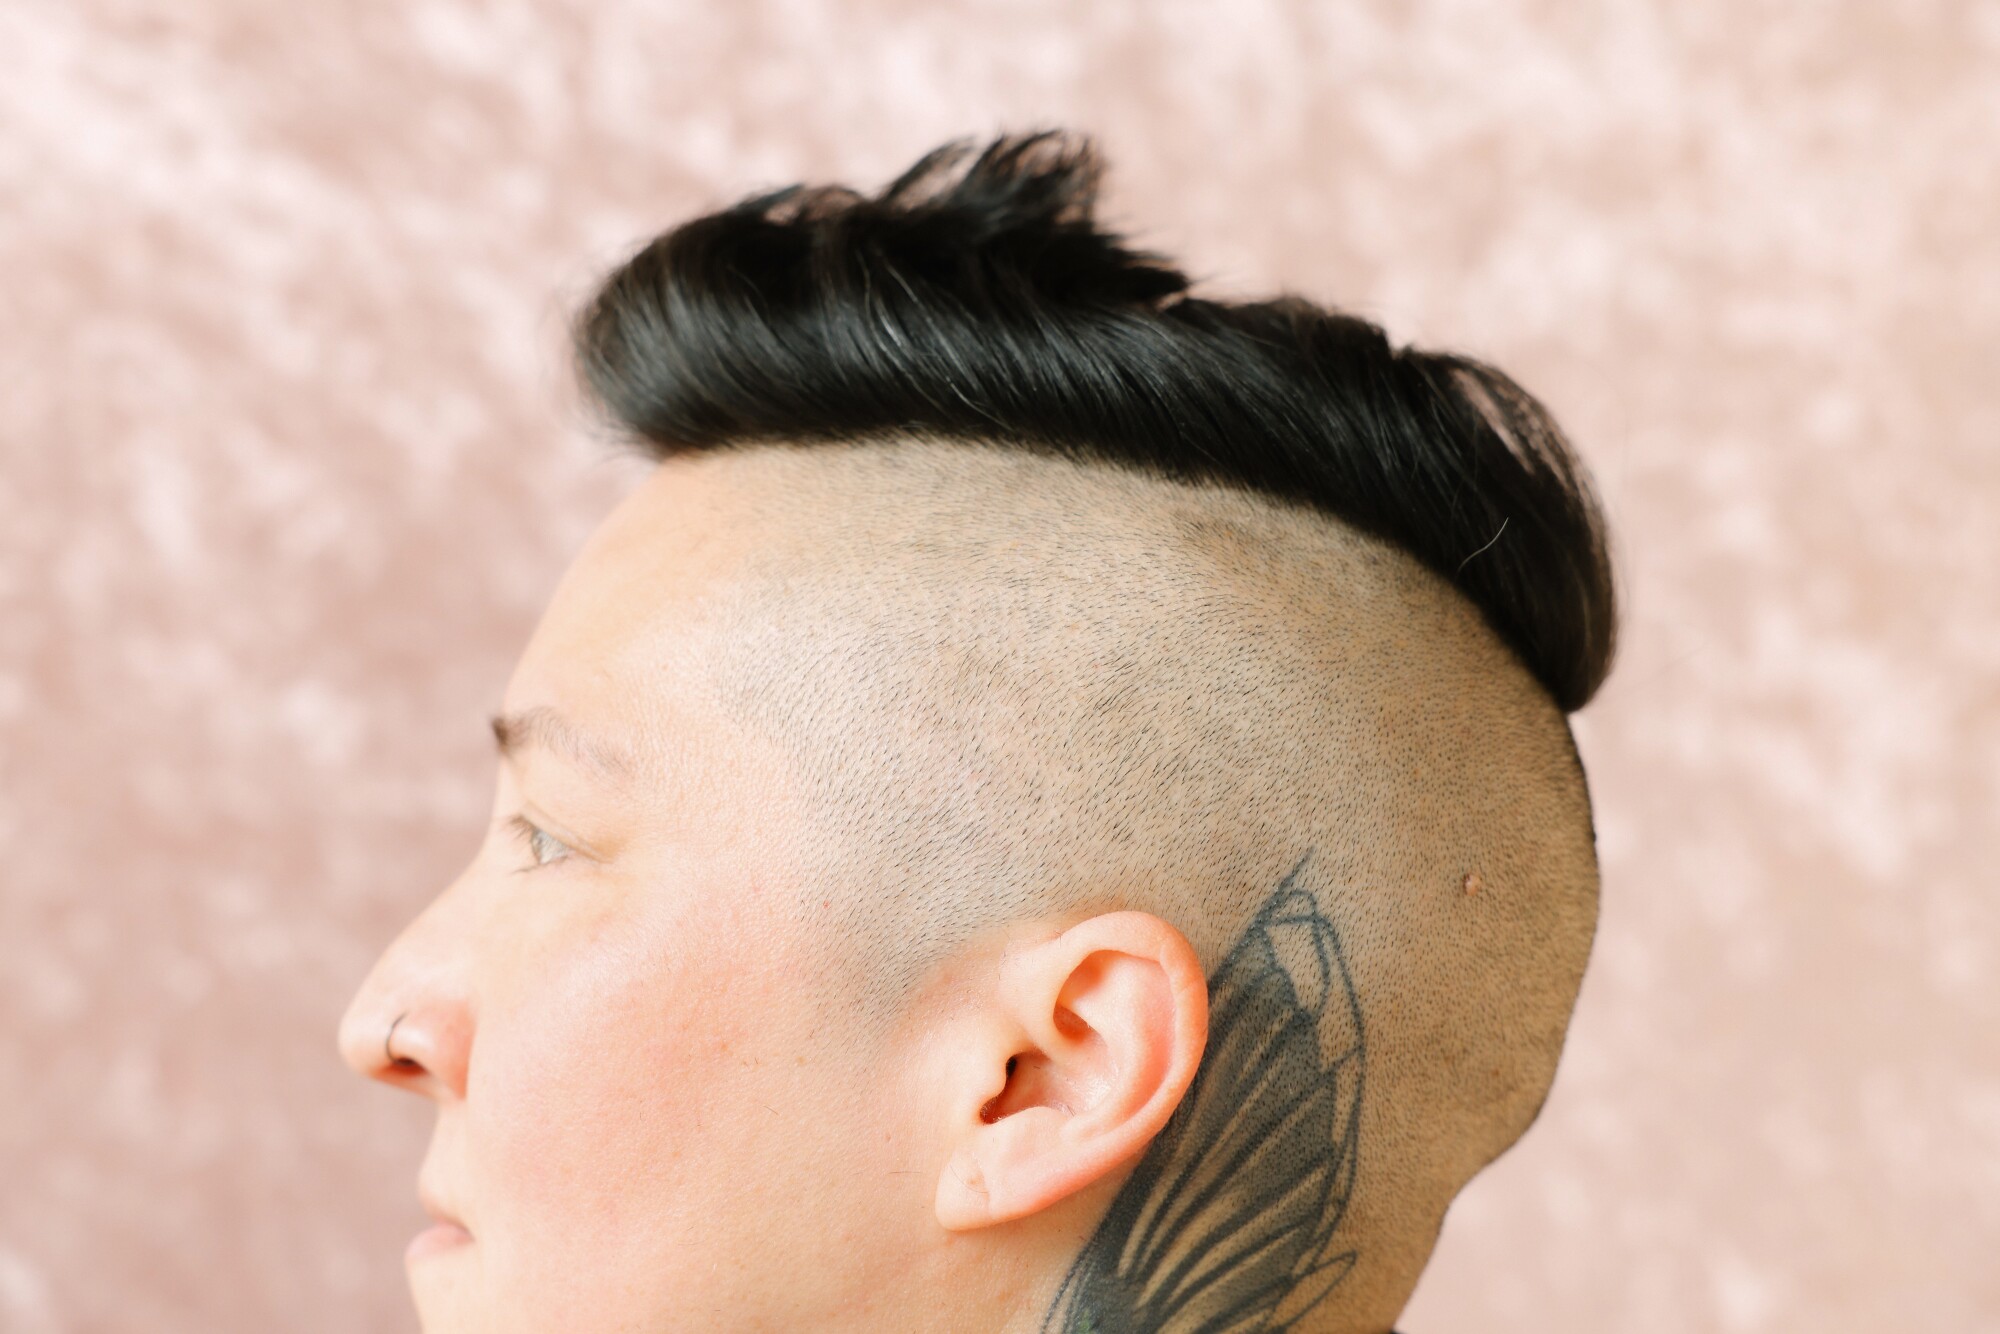 The person has hair on the side of the head, long hair on the top and tattoos on the sides of the ears